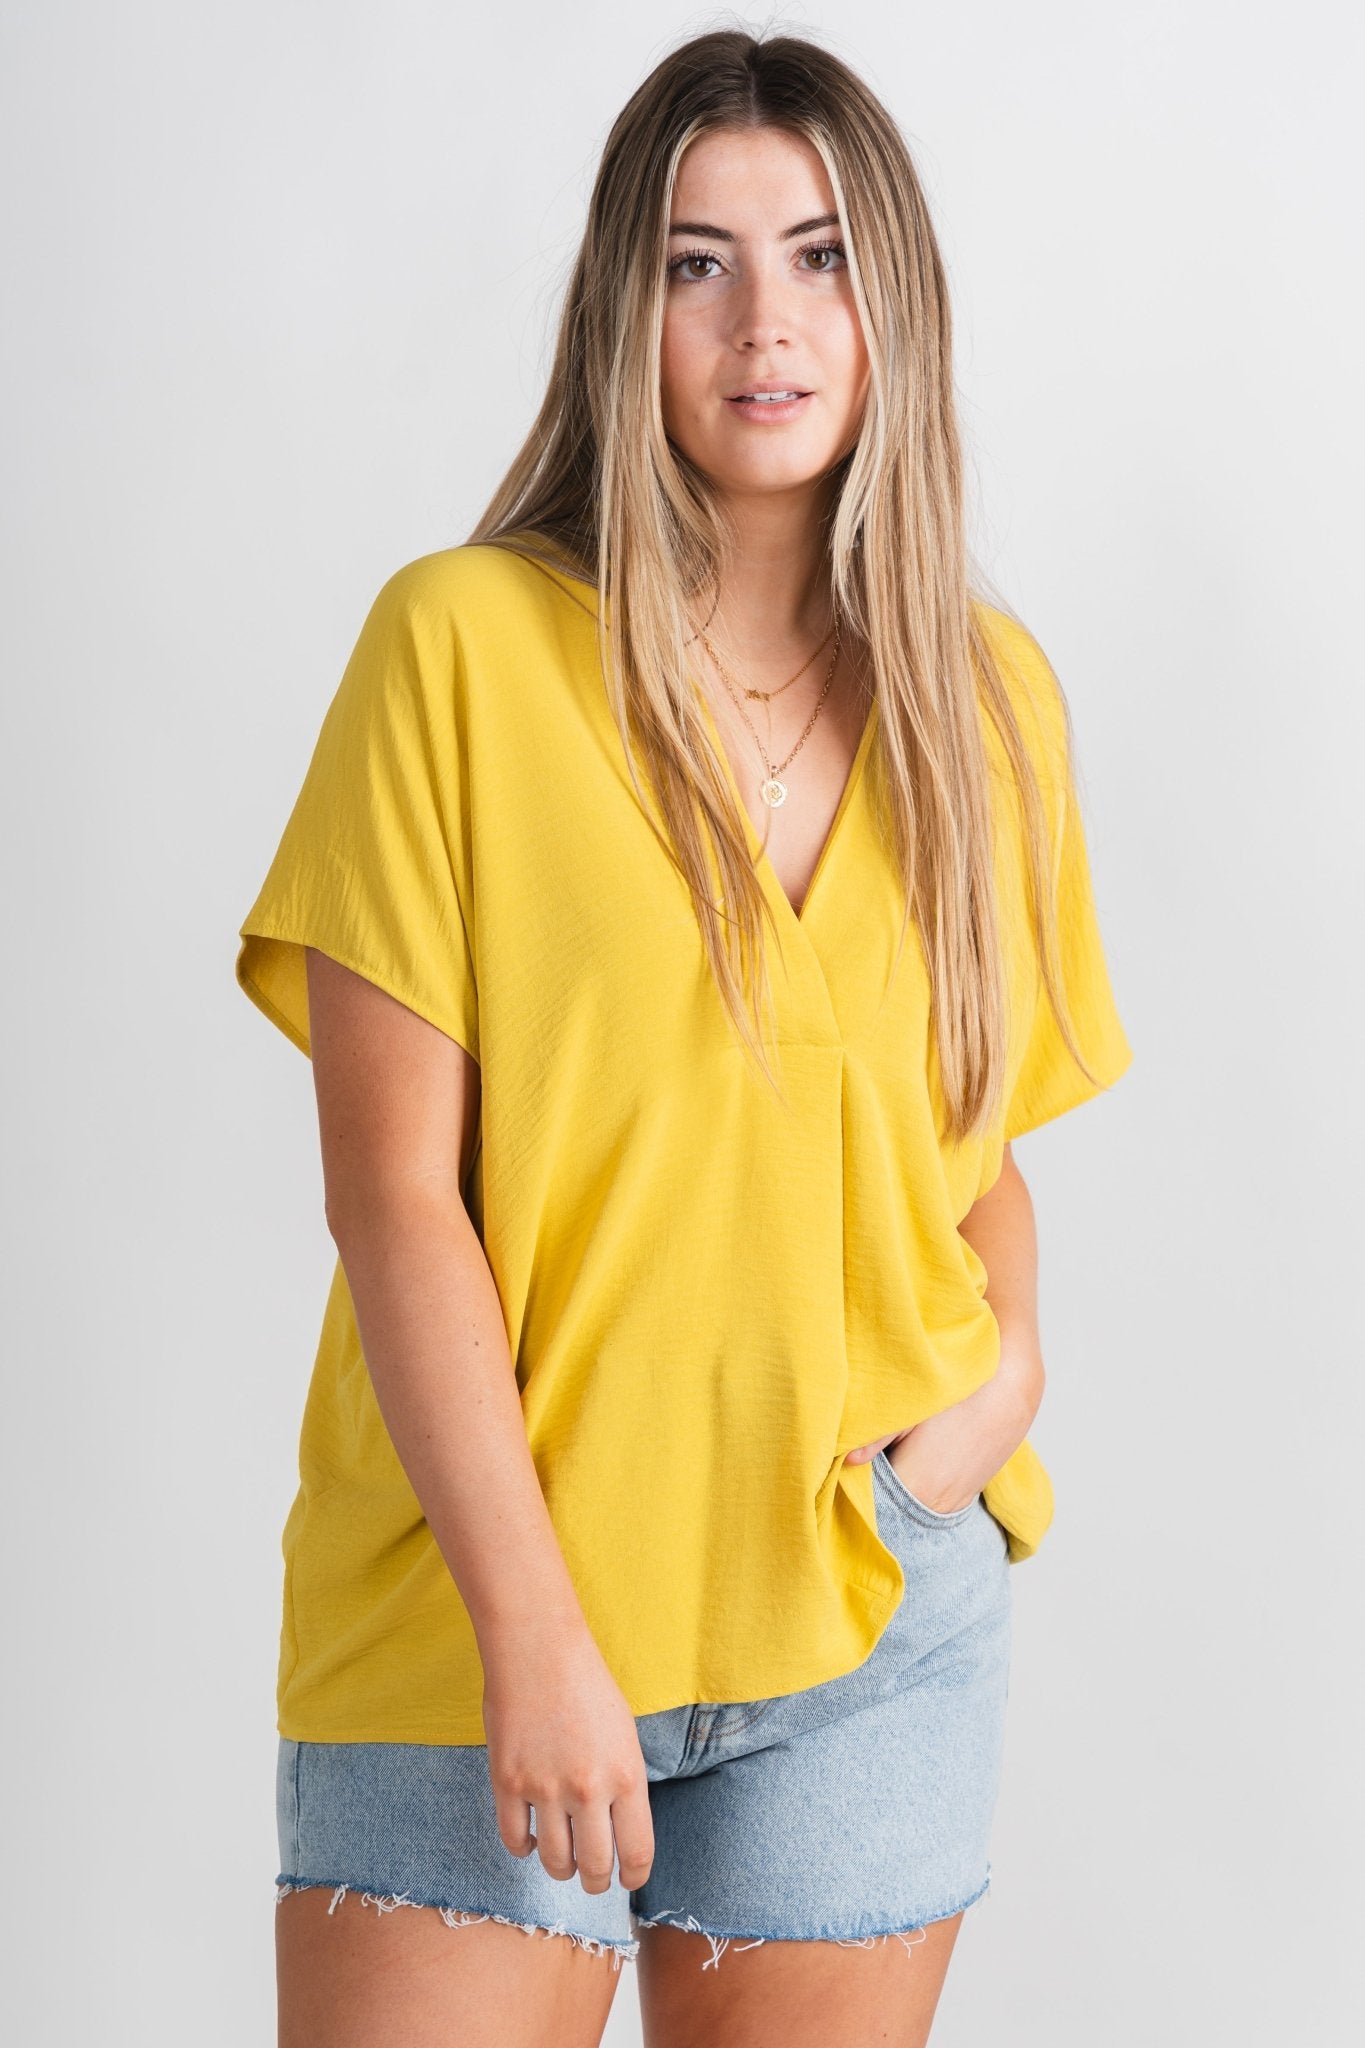 V-neck kaftan top yellow - Stylish Top - Trendy Staycation Outfits at Lush Fashion Lounge Boutique in Oklahoma City